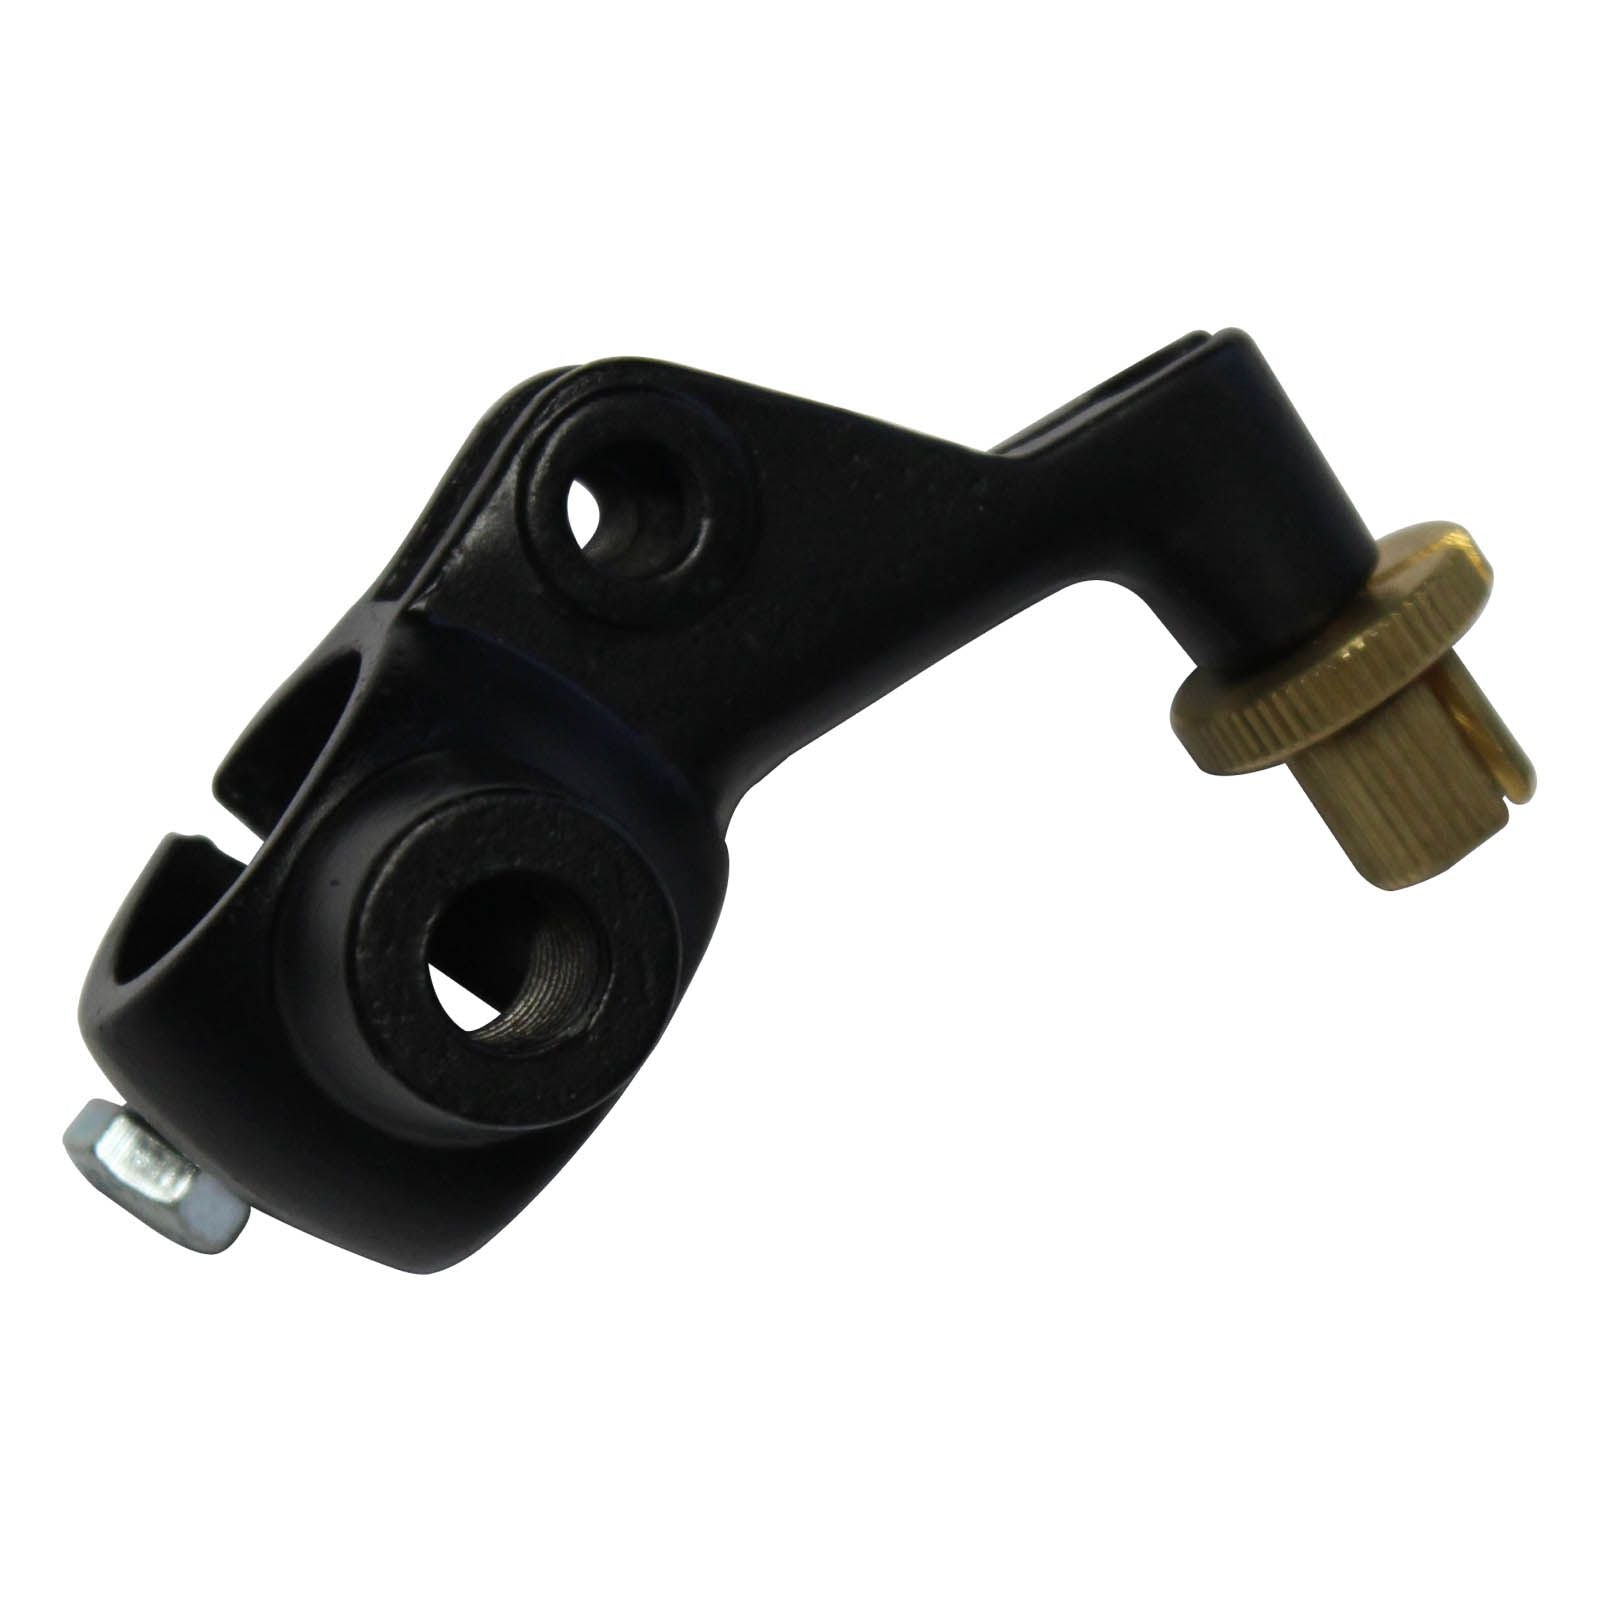 New WHITES Clutch Lever Bracket For Honda 1PCE WITH MIRROR MOUNT #LCBH1M